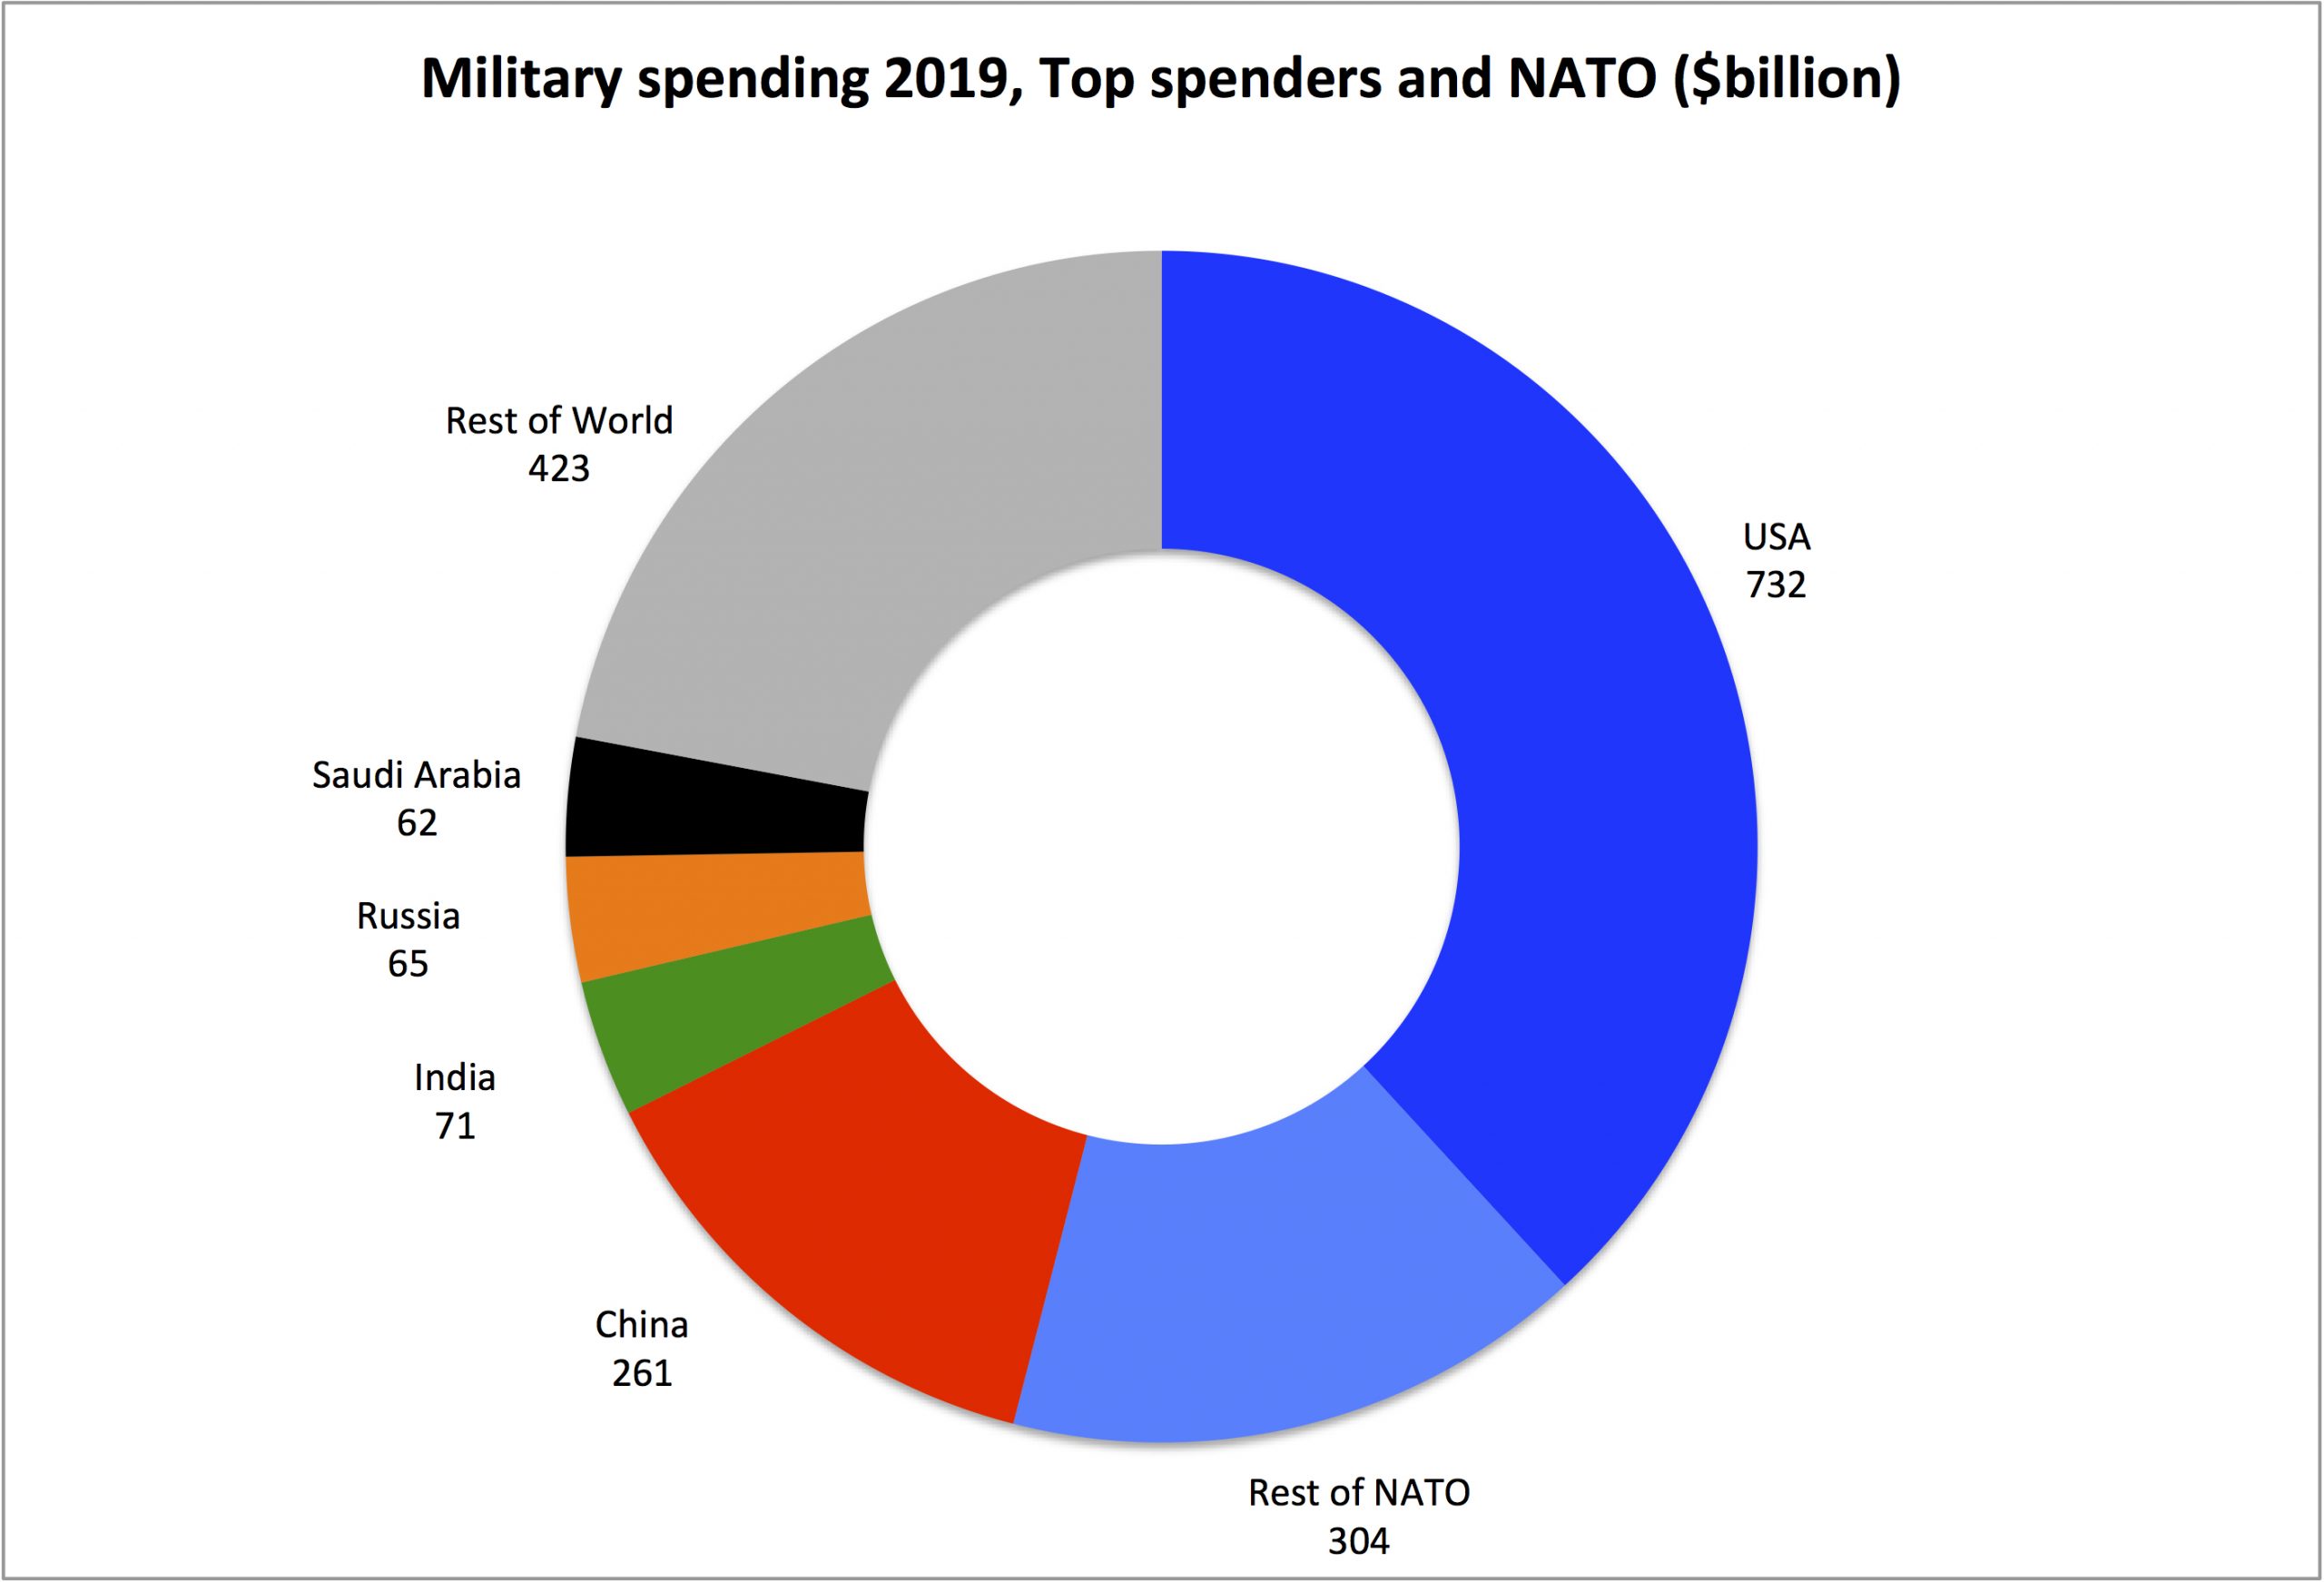 Pie chart graphic that shows the percentage of military spending by different countries. The UK accounts for around one third of global spending